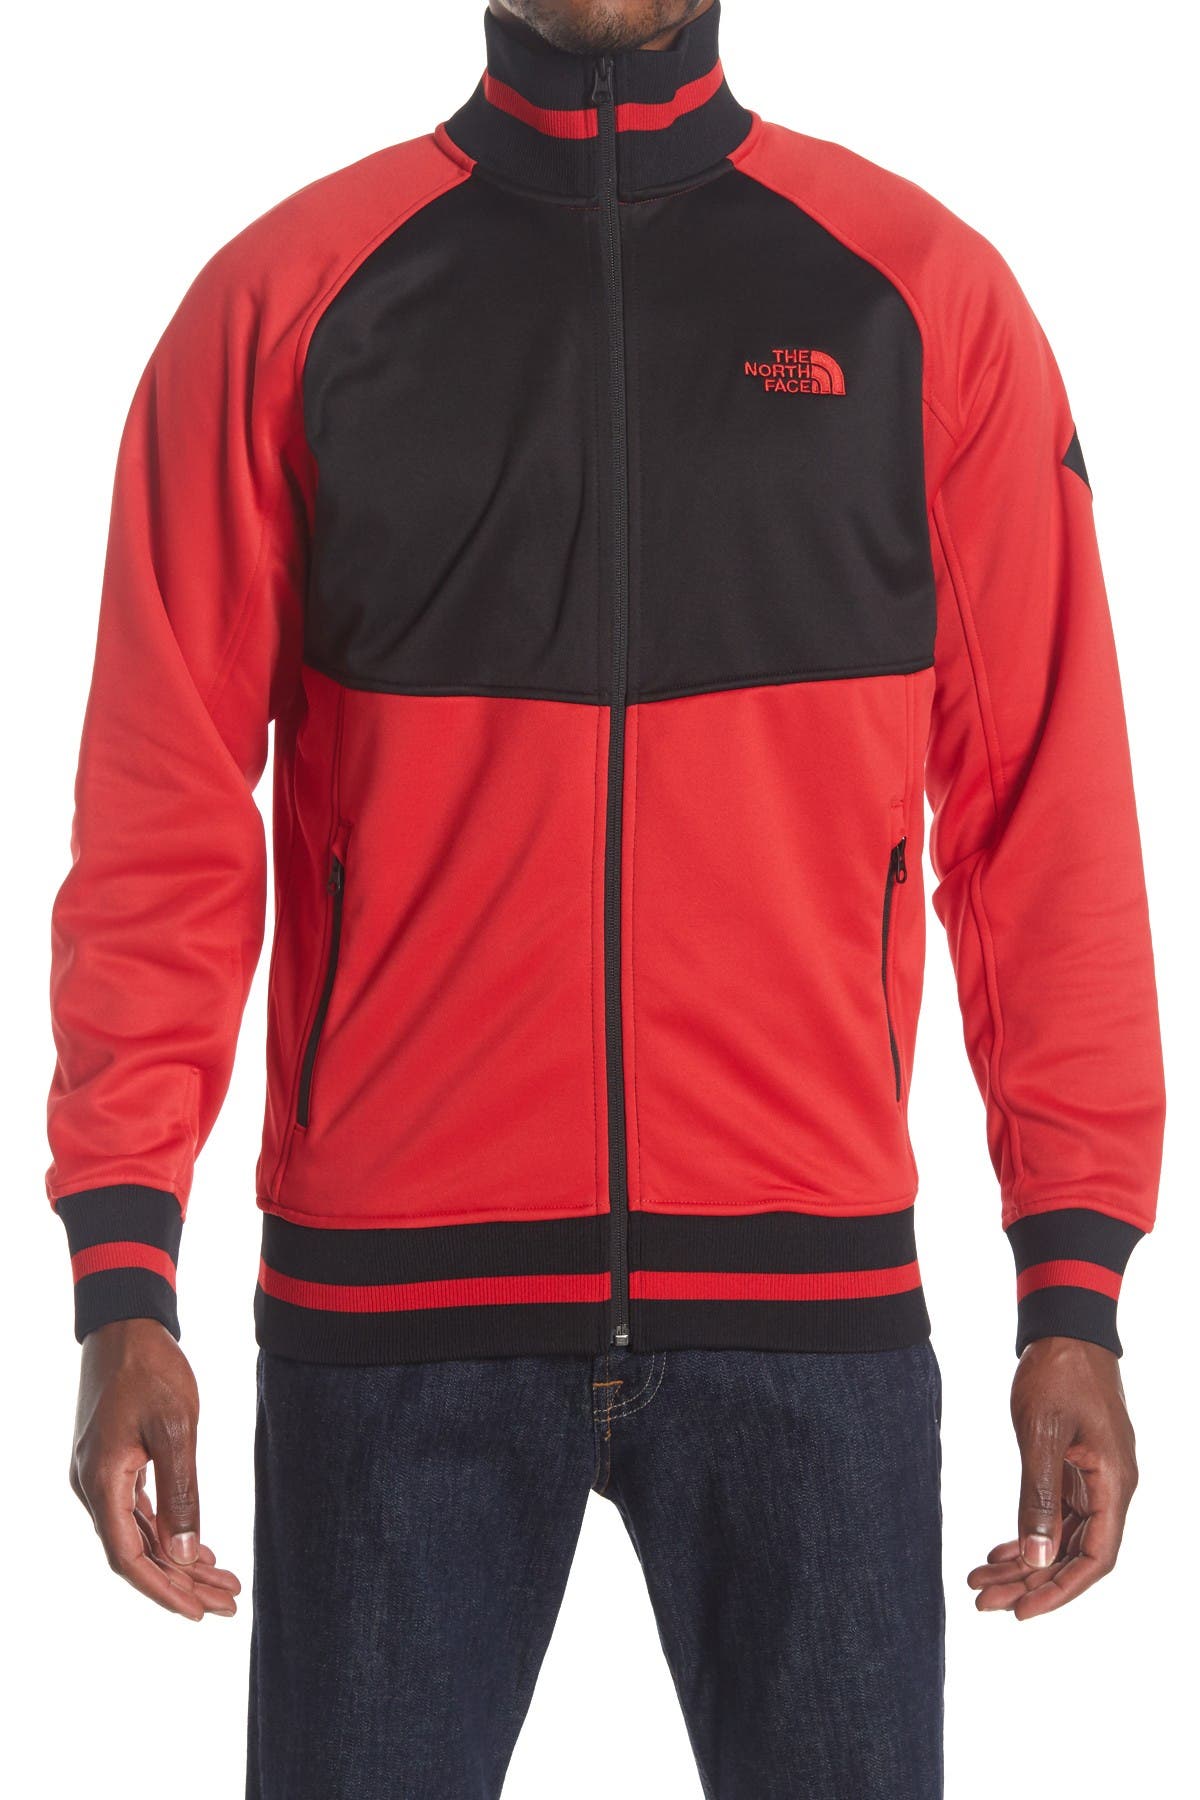 The North Face | Take Back Track Jacket 